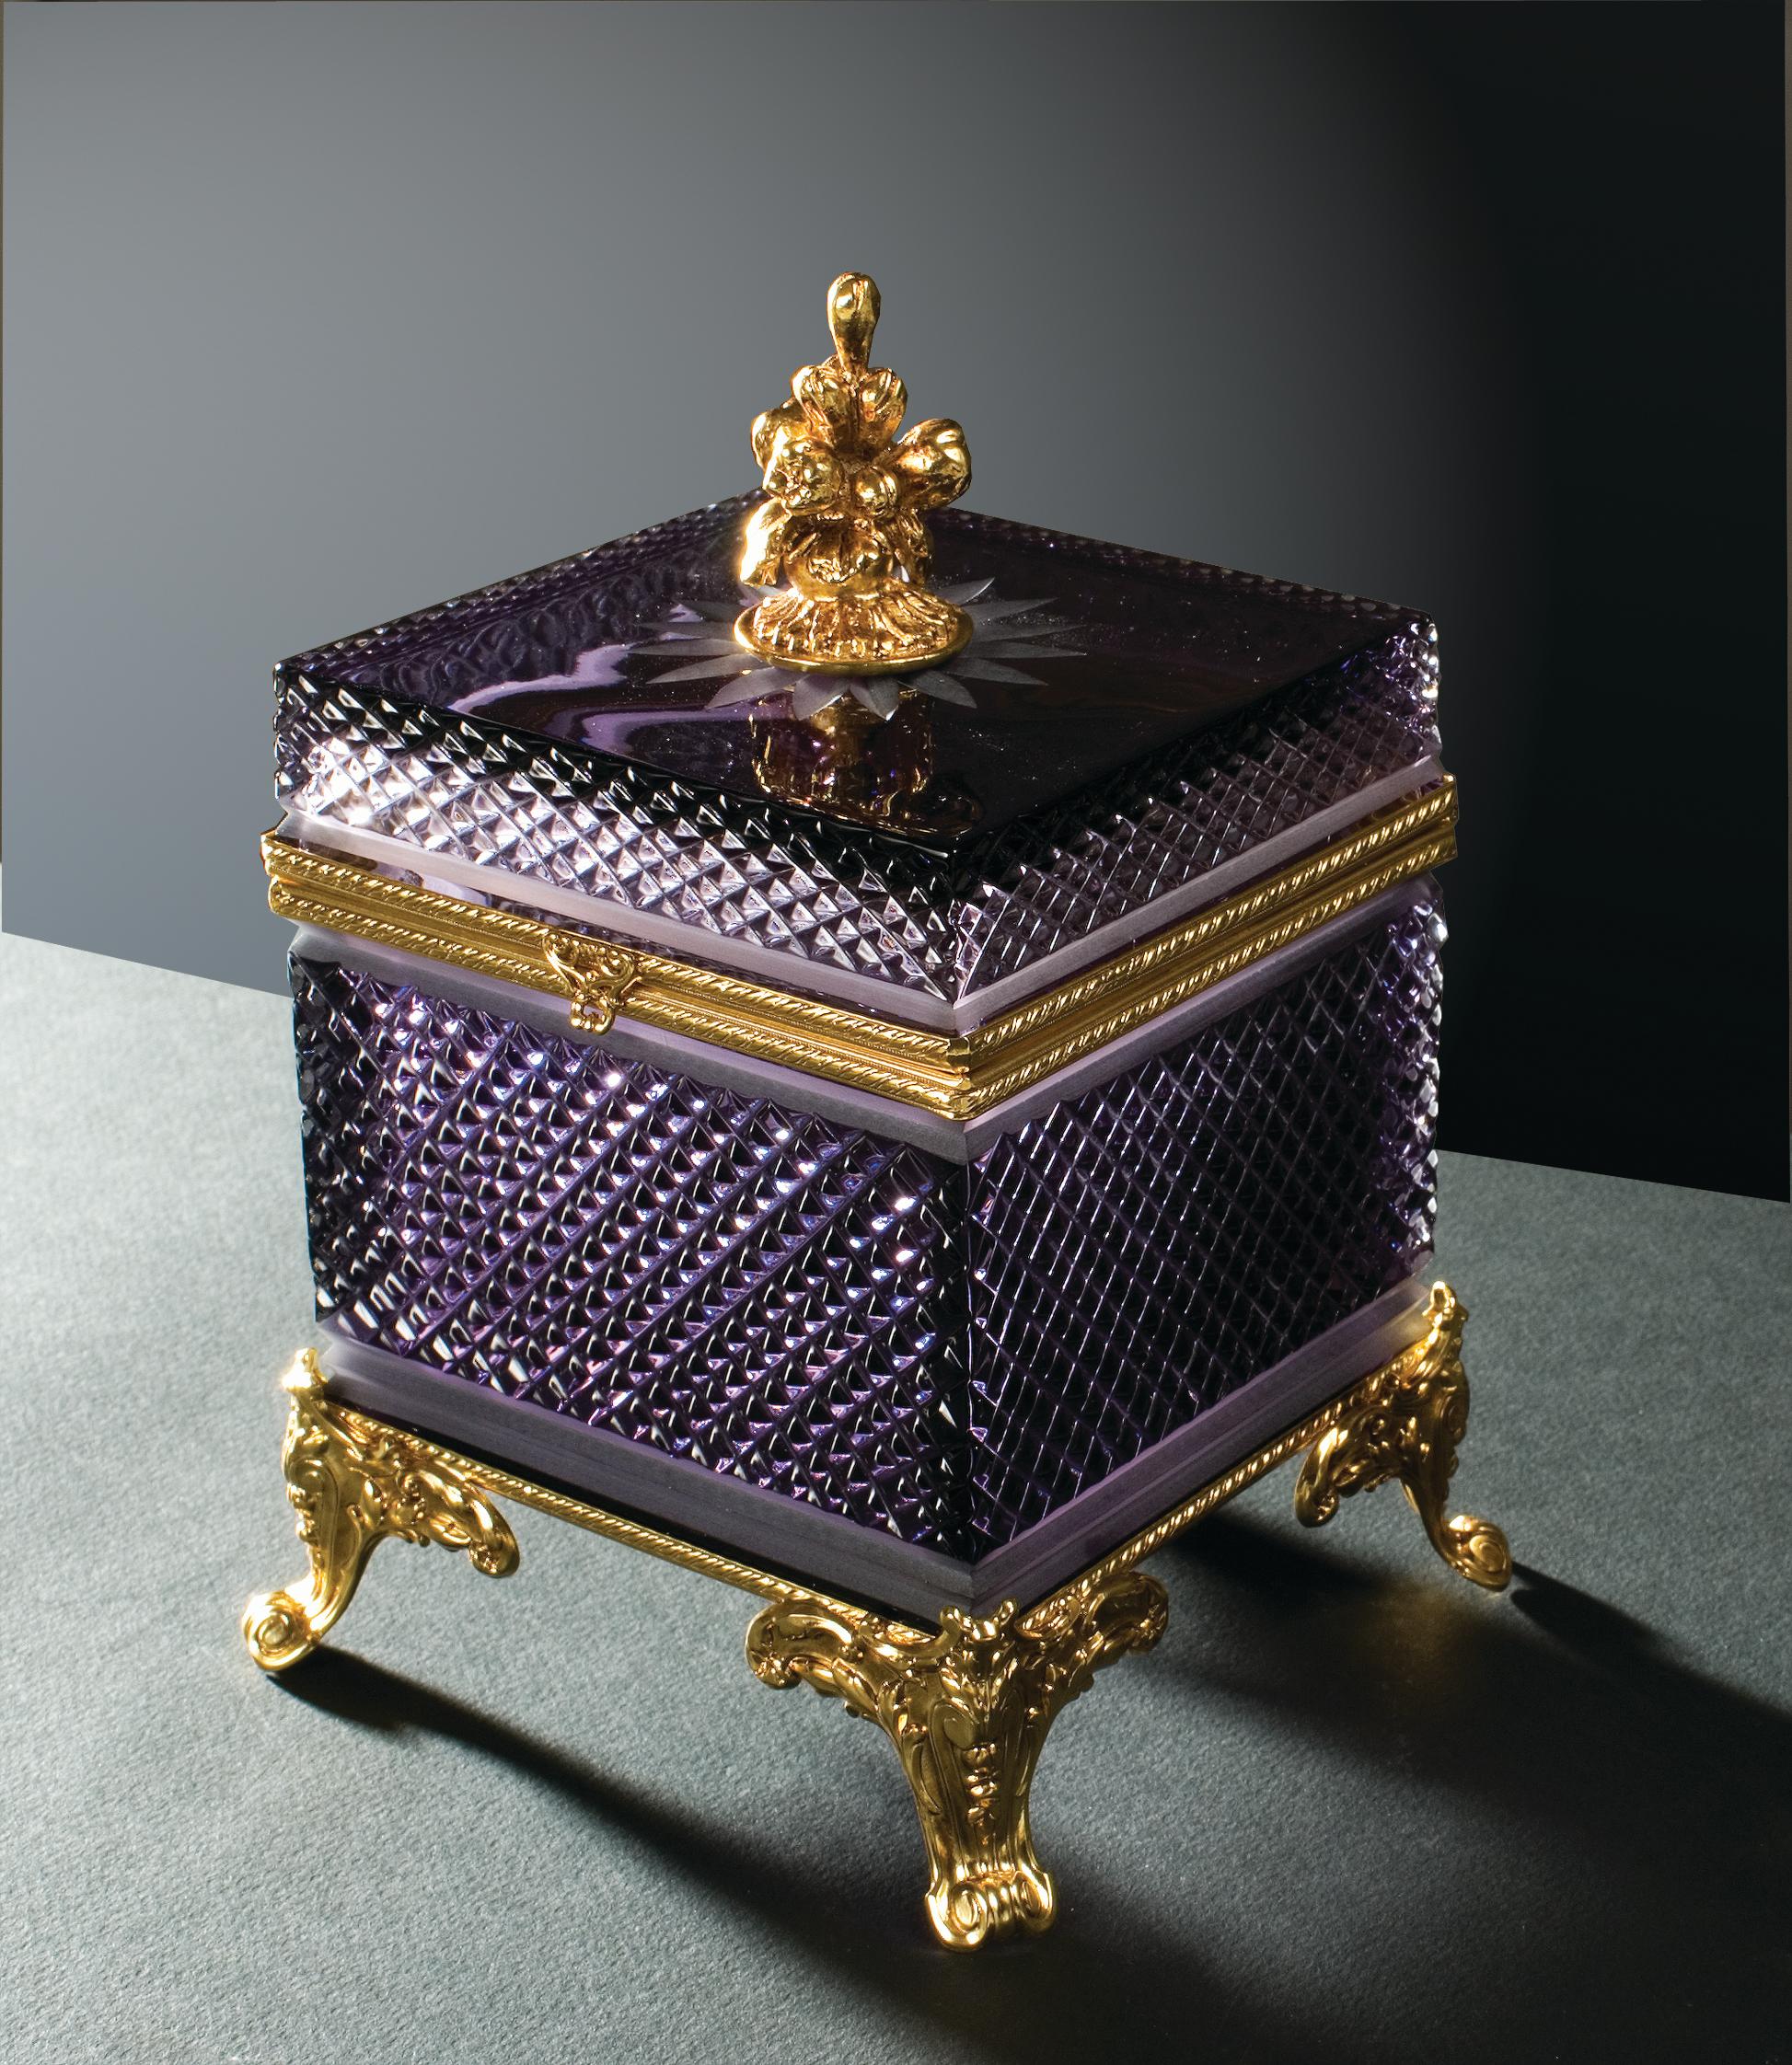 Amethyst crystal box with cut engravings embellished with brass detail made with the artisan lost wax technique with patinated gold finish. Each object is handcrafted and the care for every detail makes each item unique in its kind.
The style of